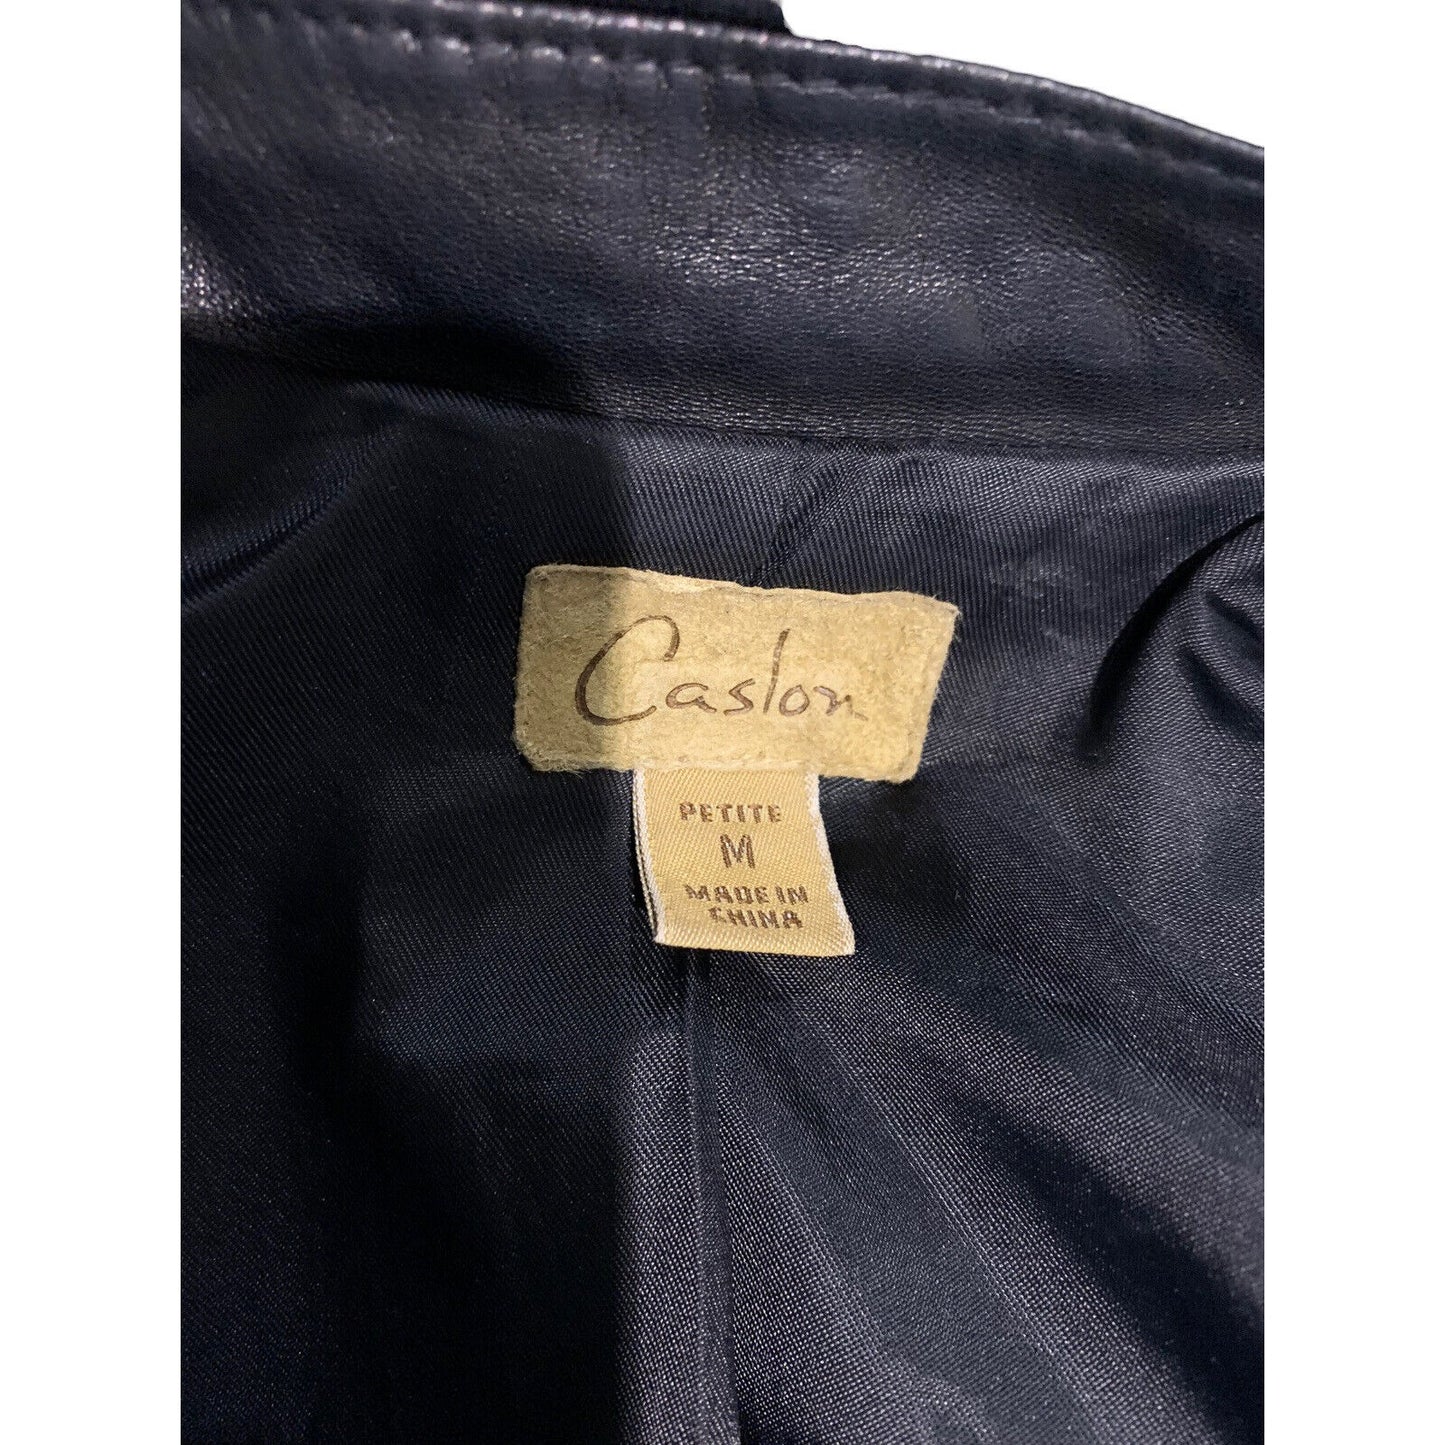 Brand Label And Size Tag